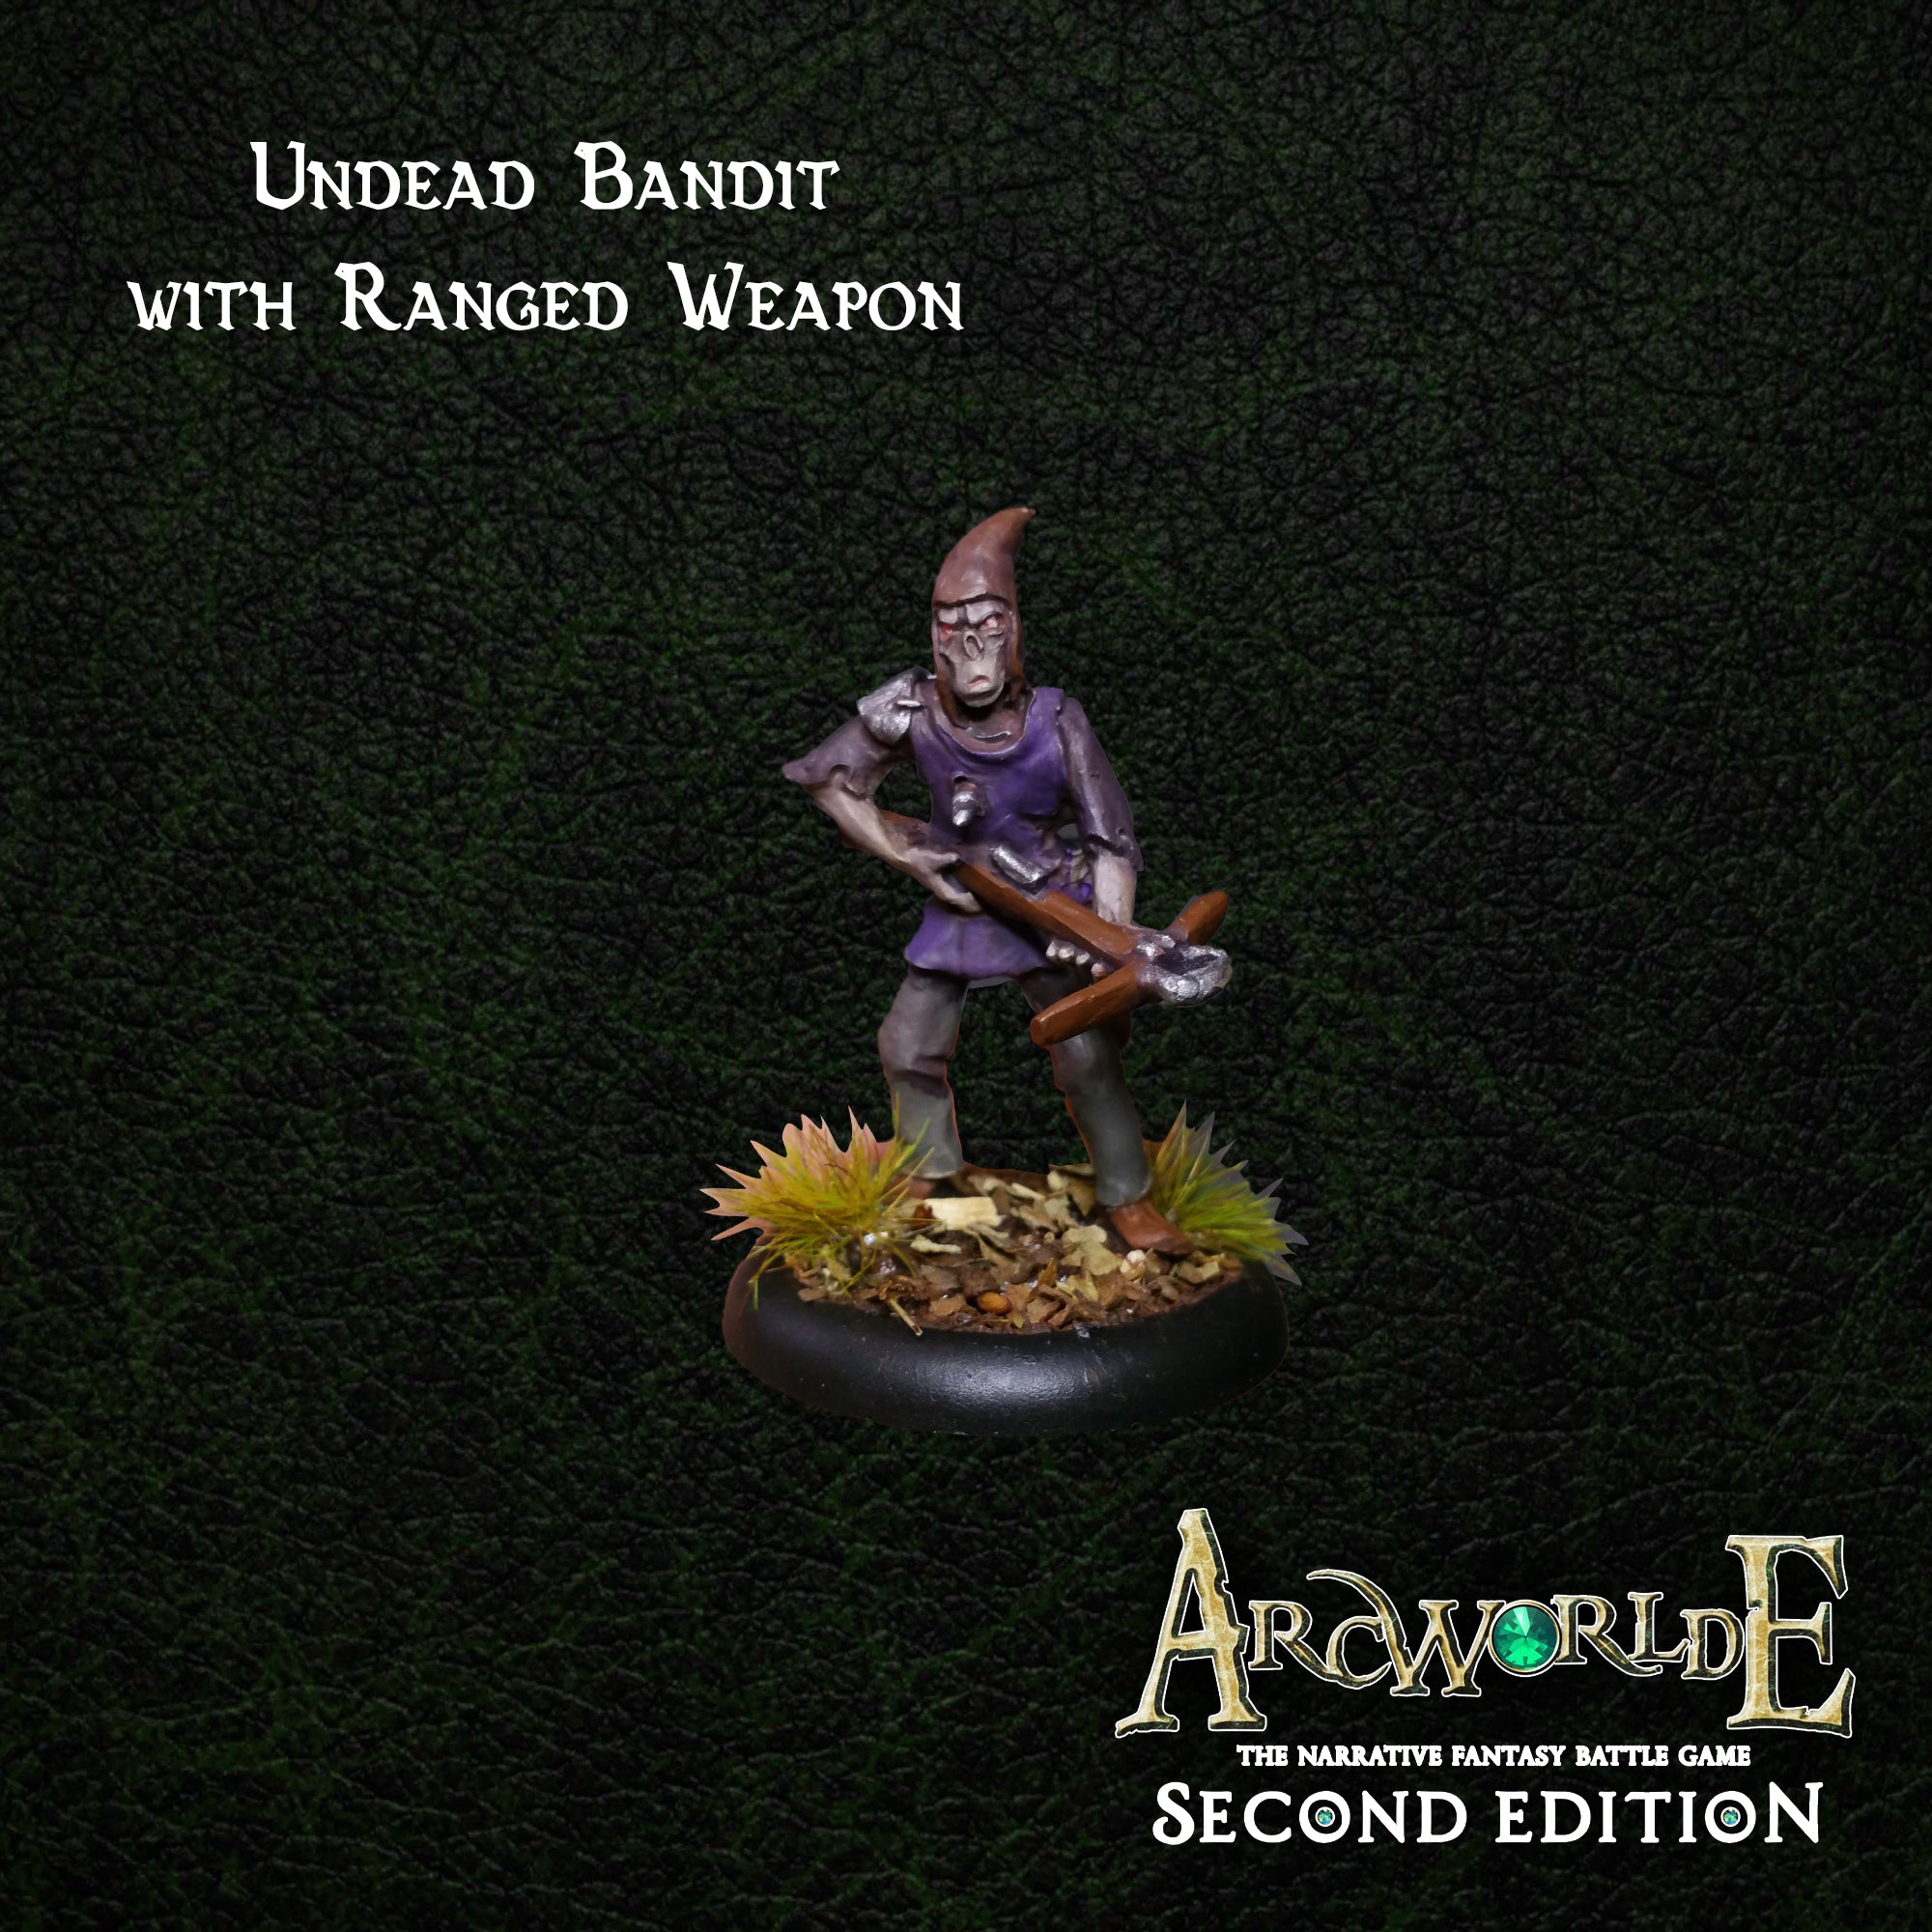 Undead Bandit with Ranged Weapon